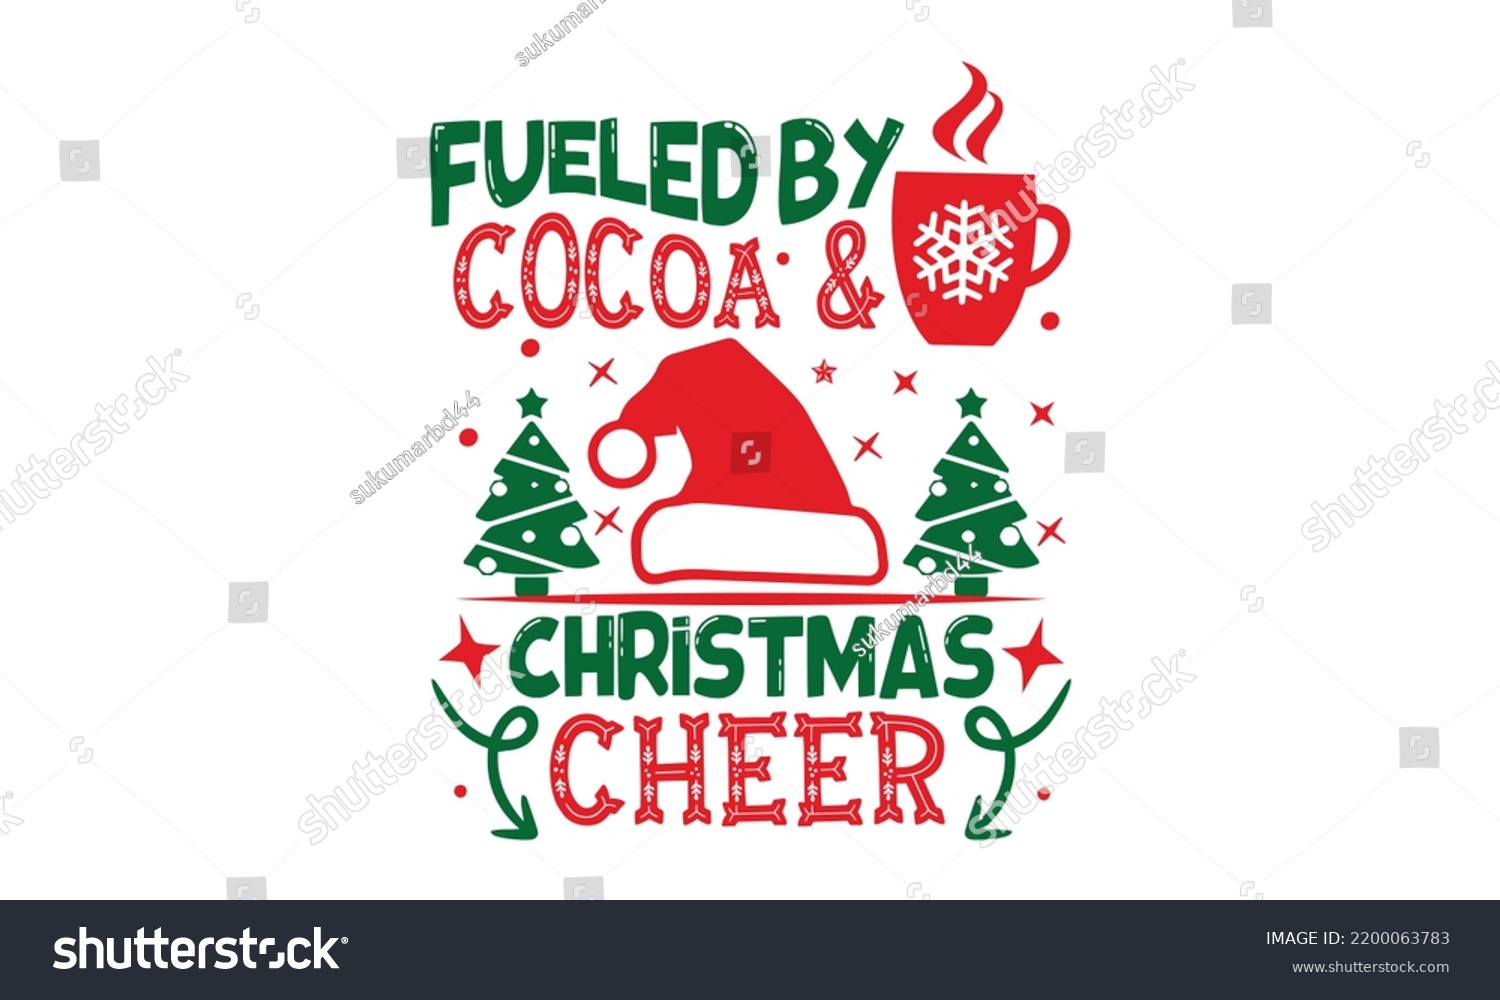 SVG of Fueled By Cocoa and Christmas Cheer - Christmas T-shirt Design, Handmade calligraphy vector illustration, Calligraphy graphic design, EPS, SVG Files for Cutting, bag, cups svg